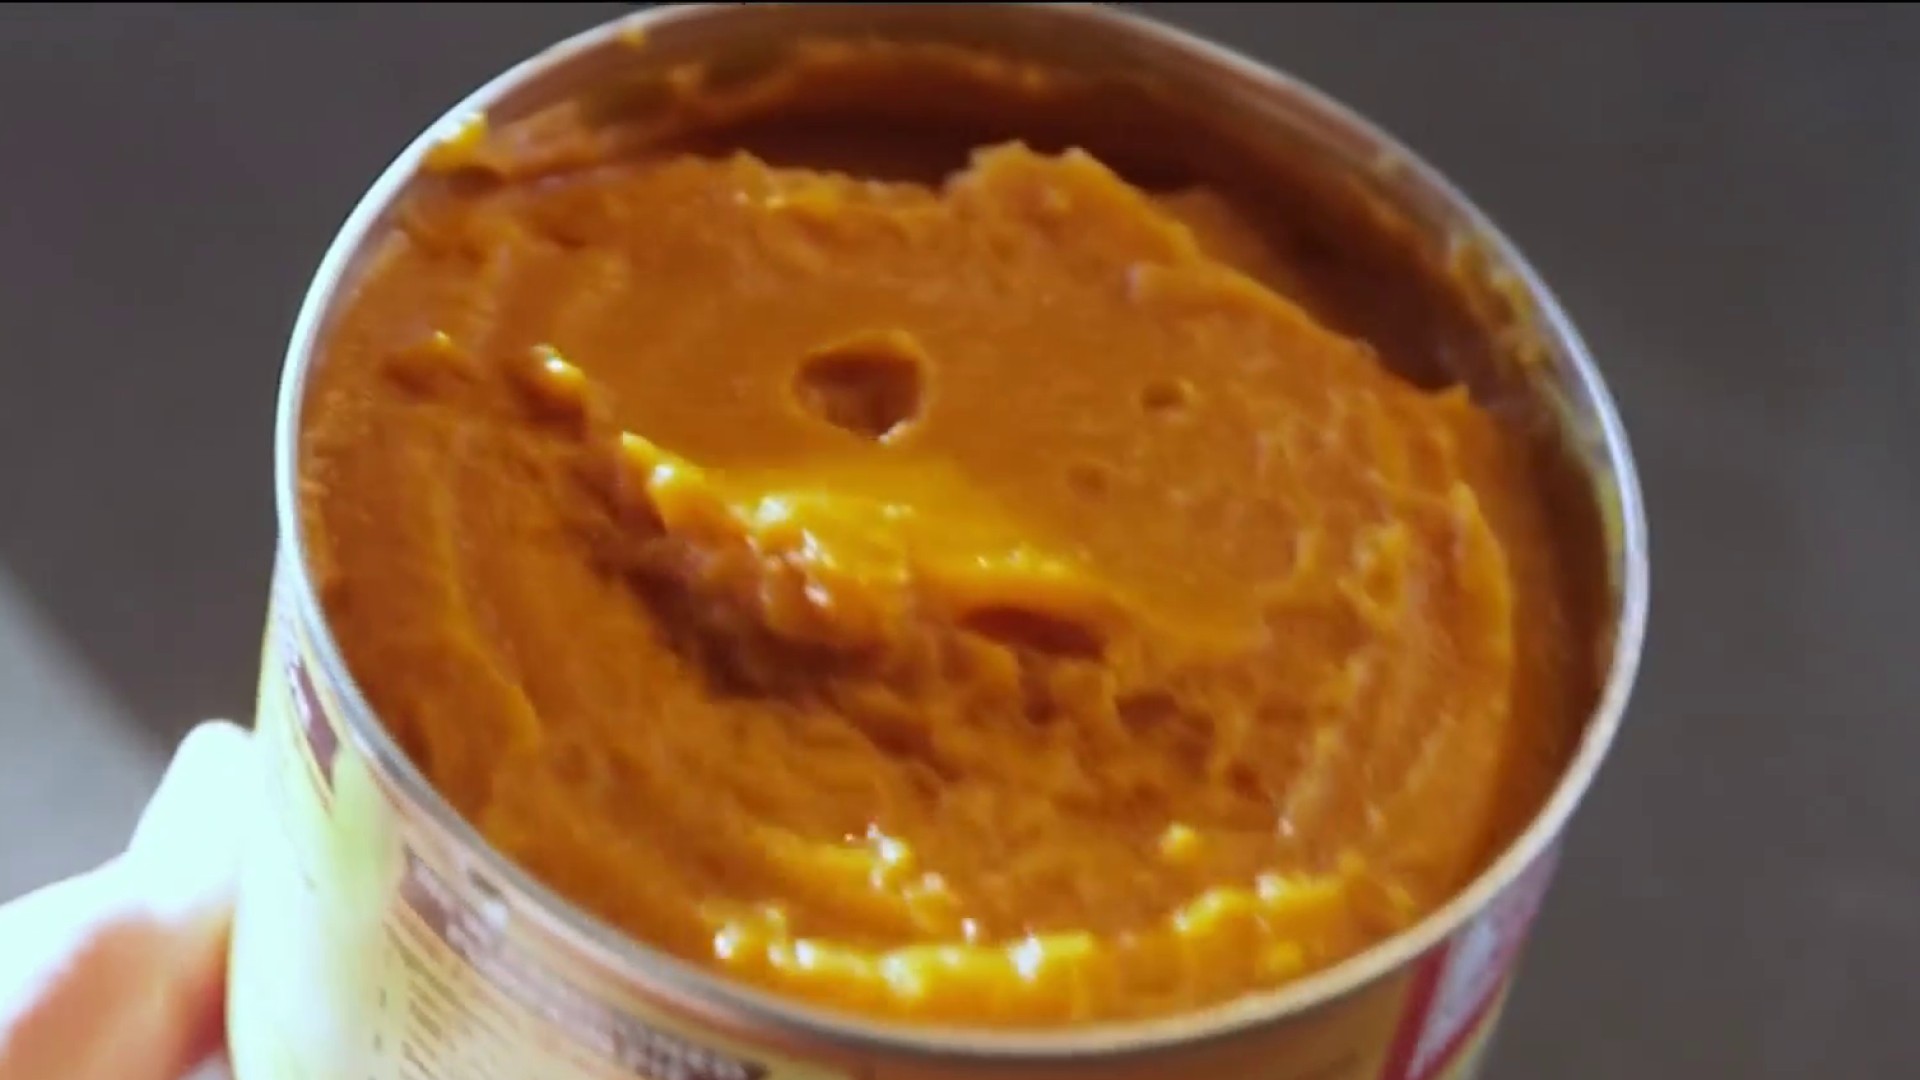 What's Really in Canned Pumpkin?